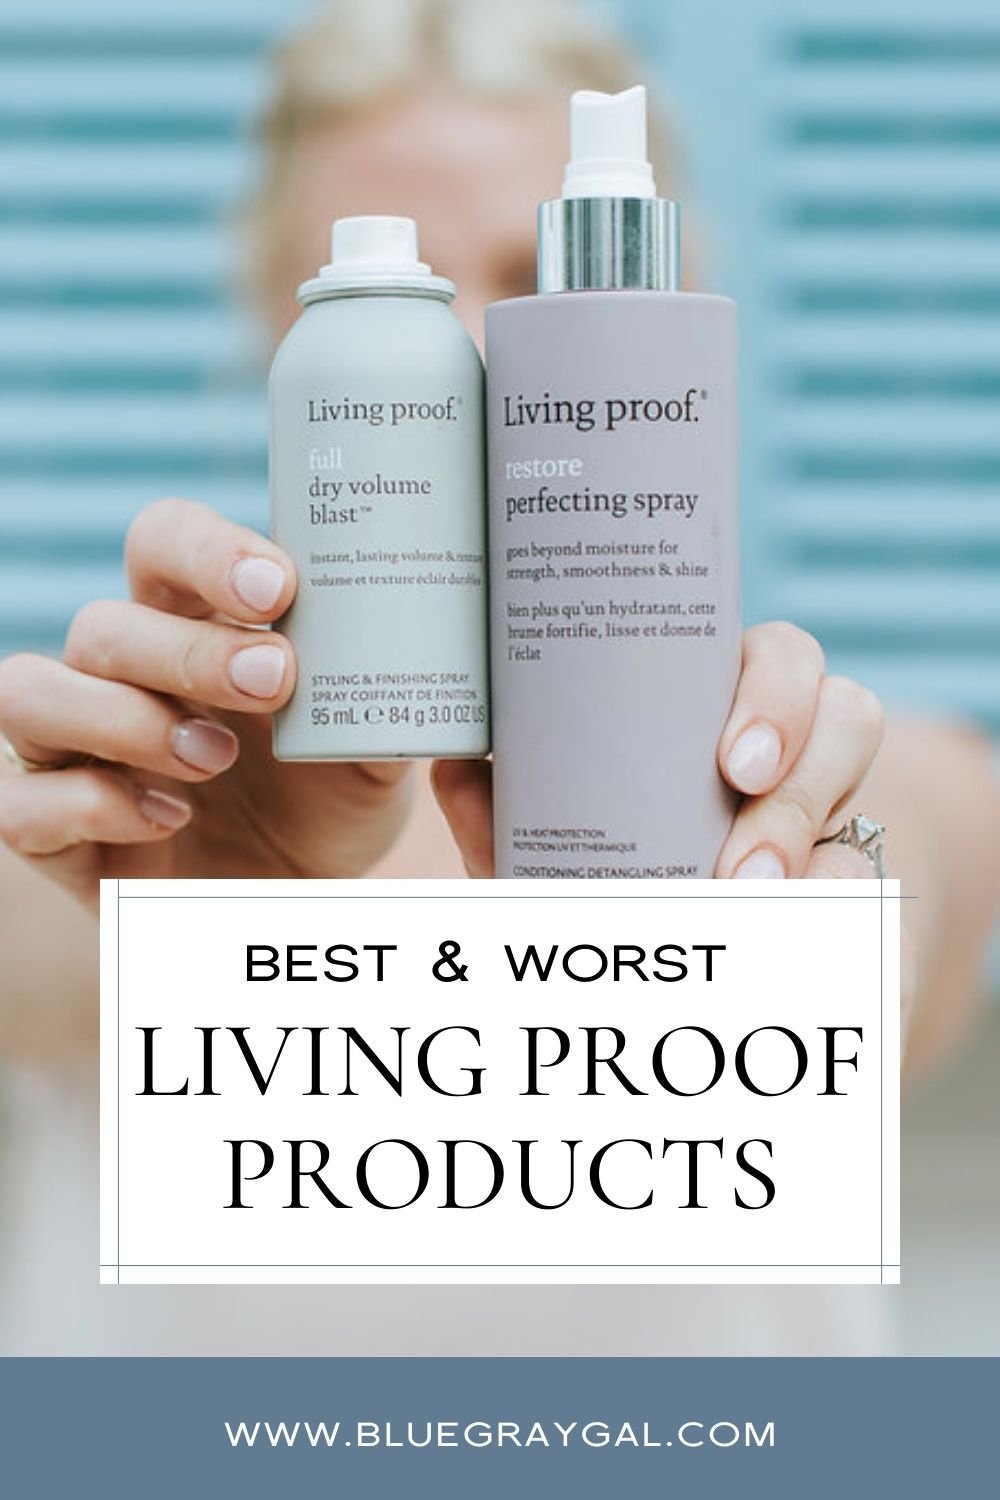 Refreshing your summer haircare products? Here's my review of the best (and worst) of Living Proof haircare, beyond the cult favorite Living Proof dry shampoo!